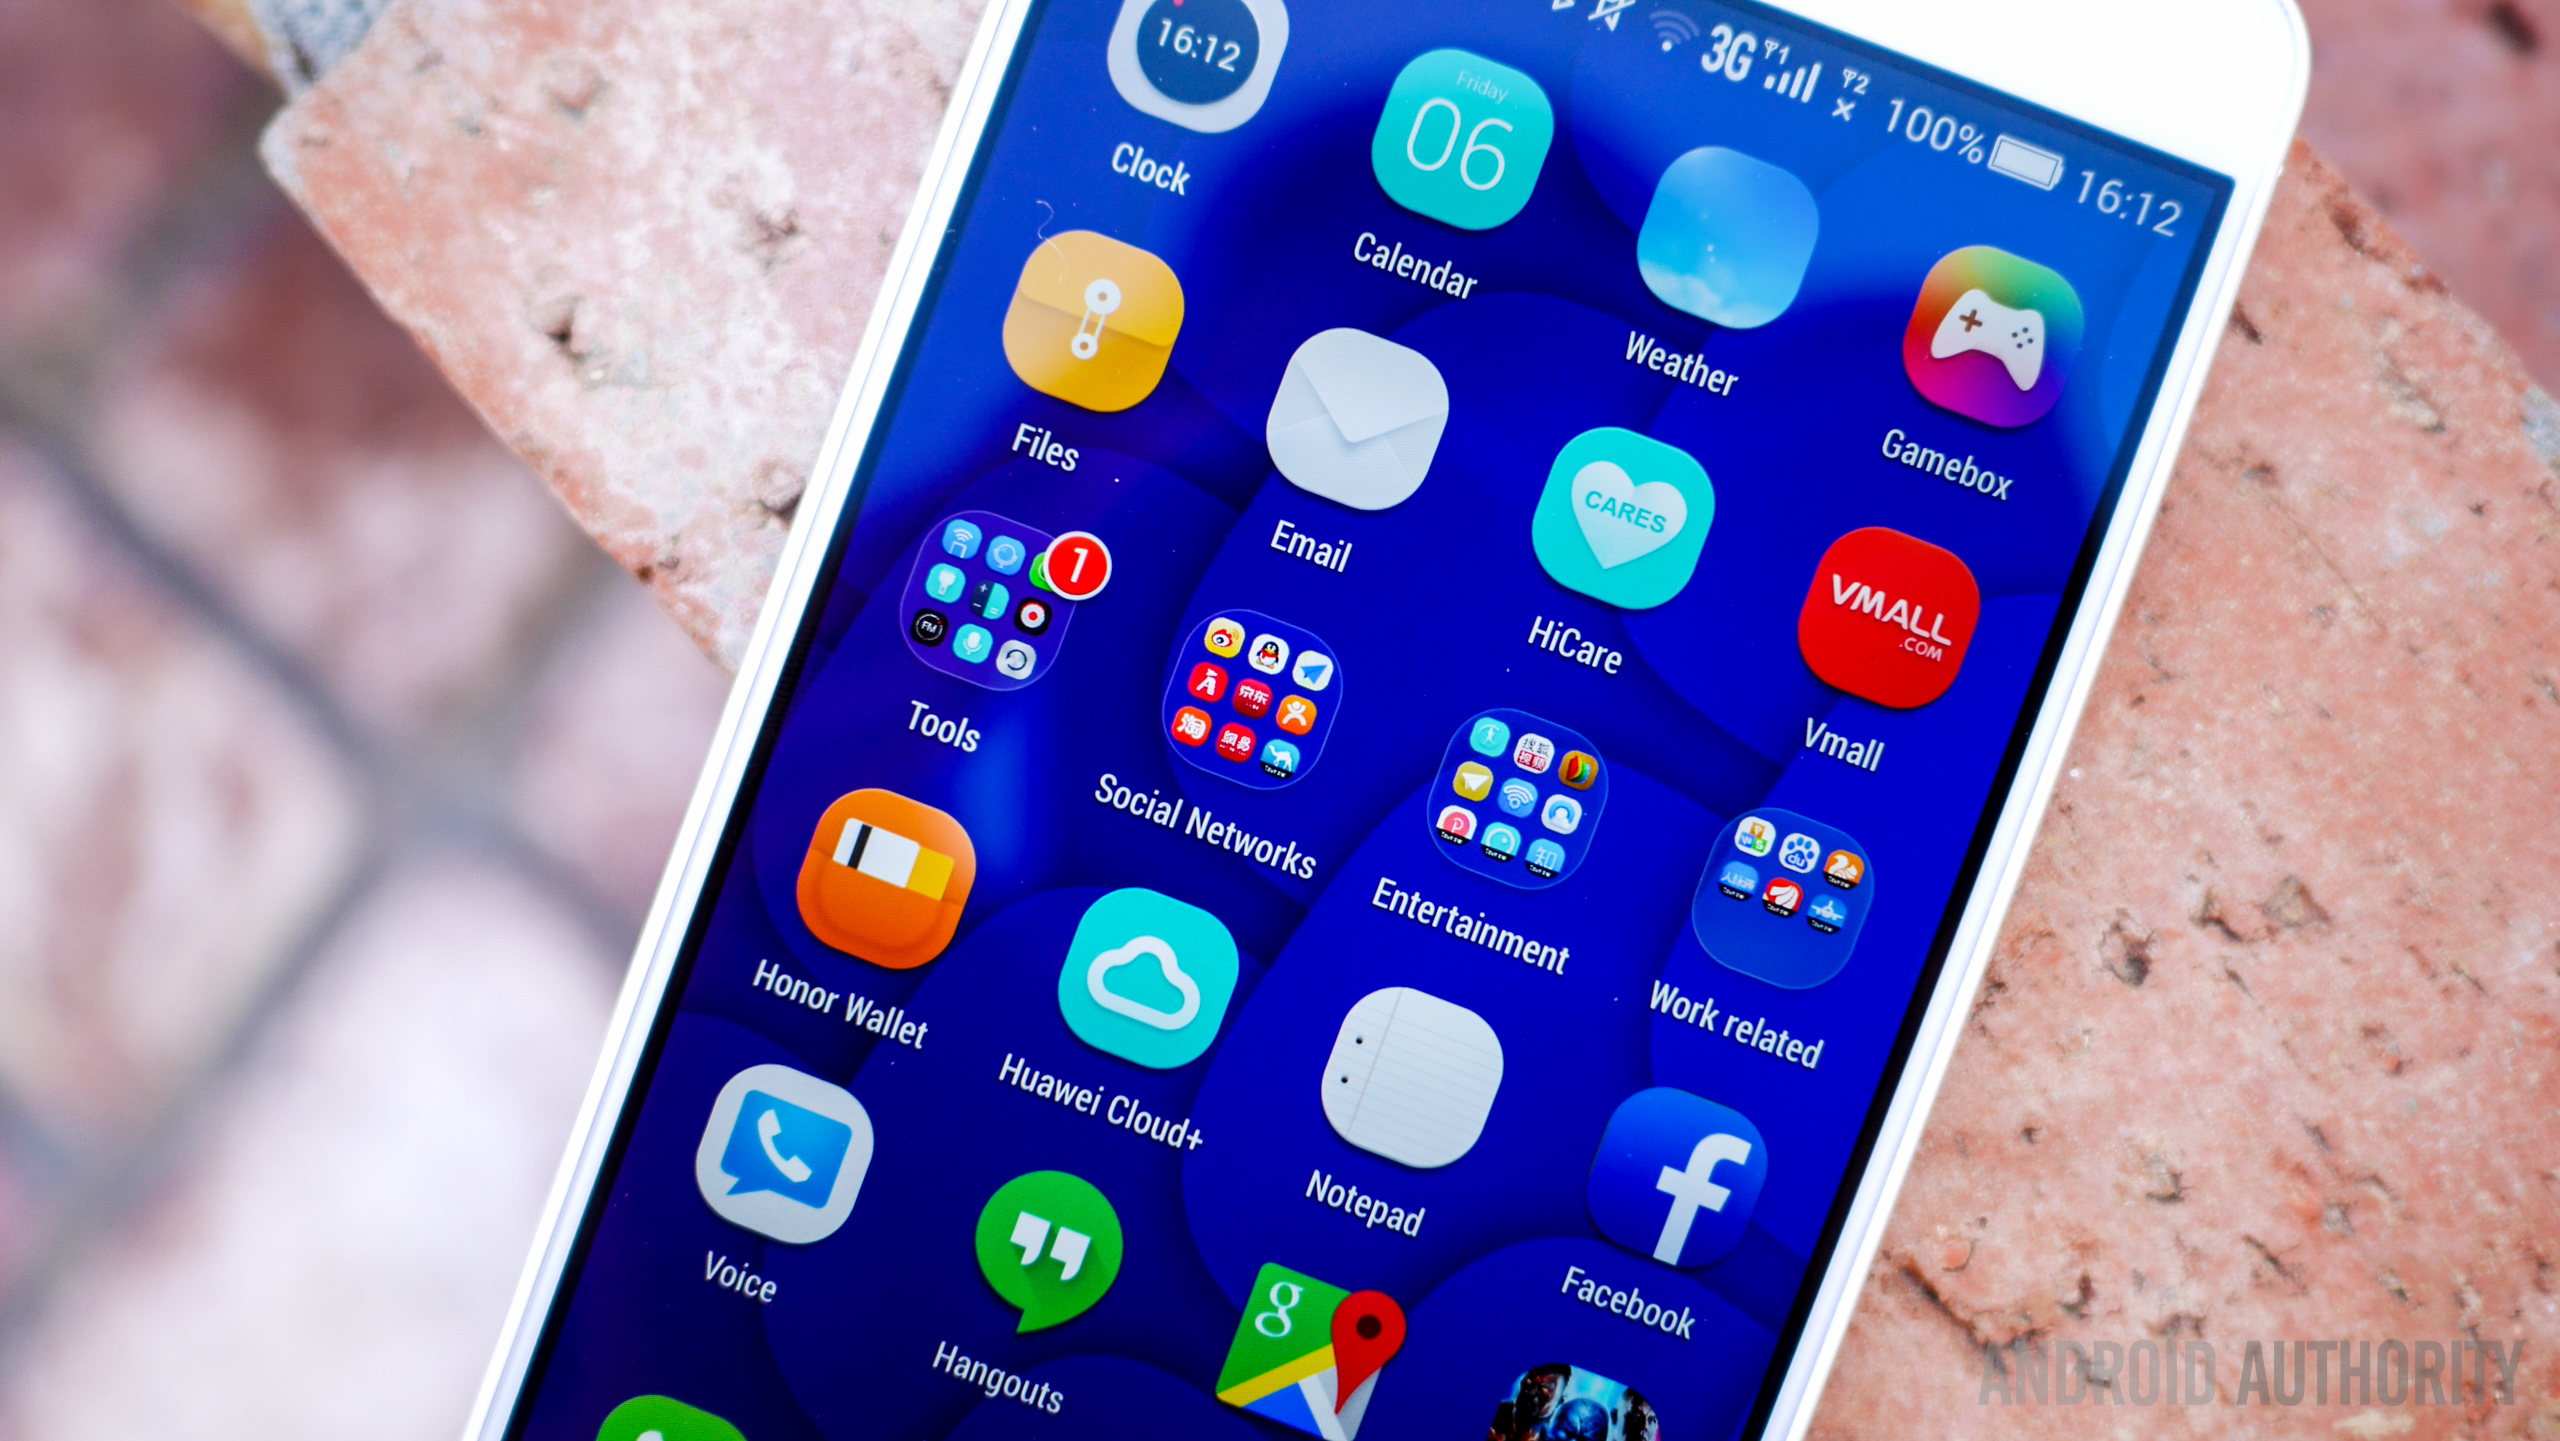 huawei honor 6 plus review aa (7 of 29)